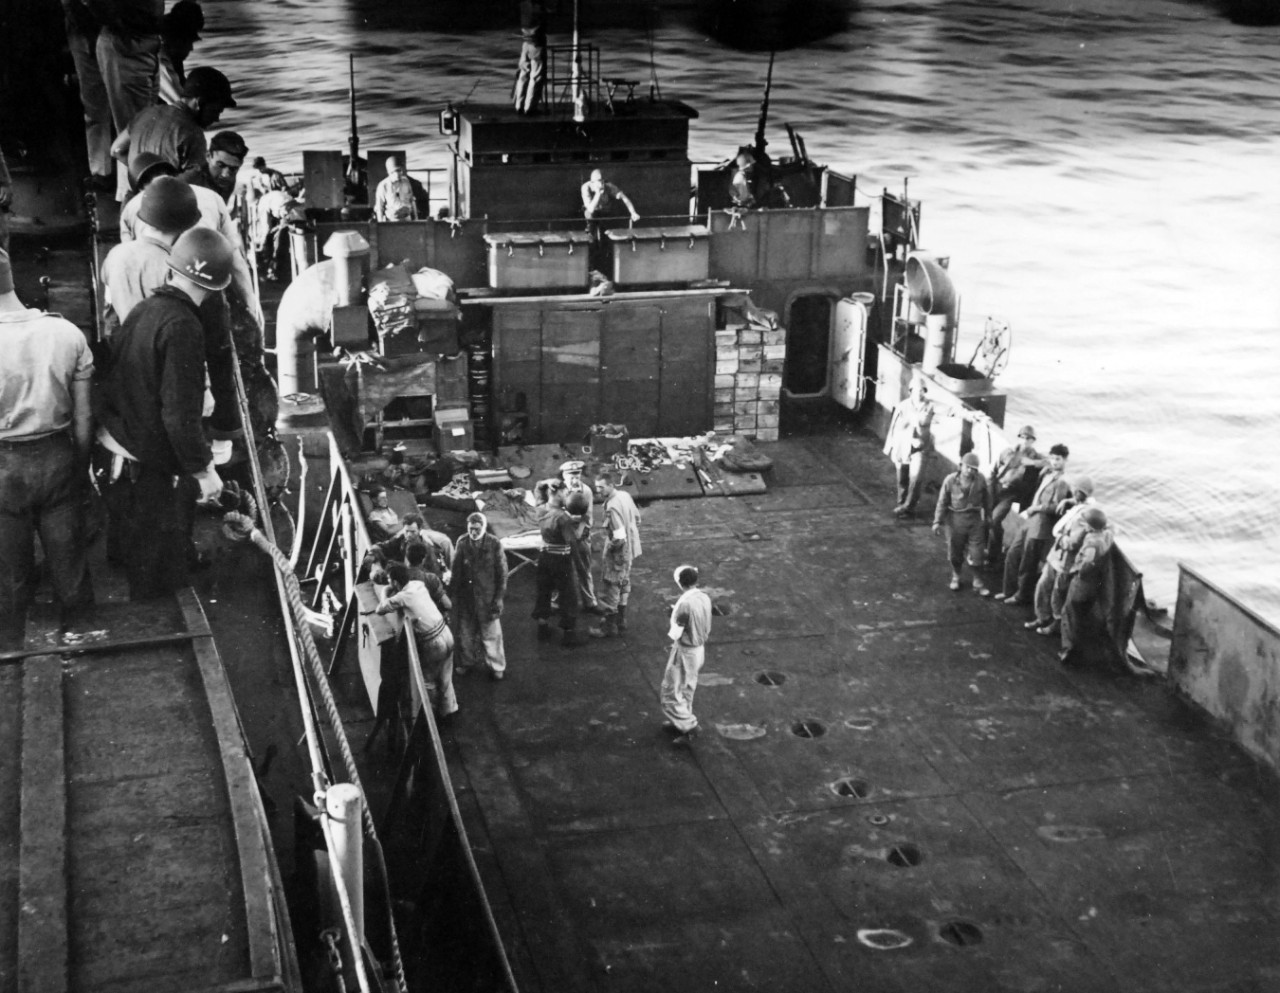 80-G-74837:   Operation Husky, July-August 1943  Bringing U.S. wounded and German prisoners aboard USS Boise (CL-47) for treatment off shore Gela, Sicily.  Photographed by USS Boise (CL-47), July 13 1943.    Official U.S. Navy Photograph, now in the collections of the National Archives.  (2018/02/14).    